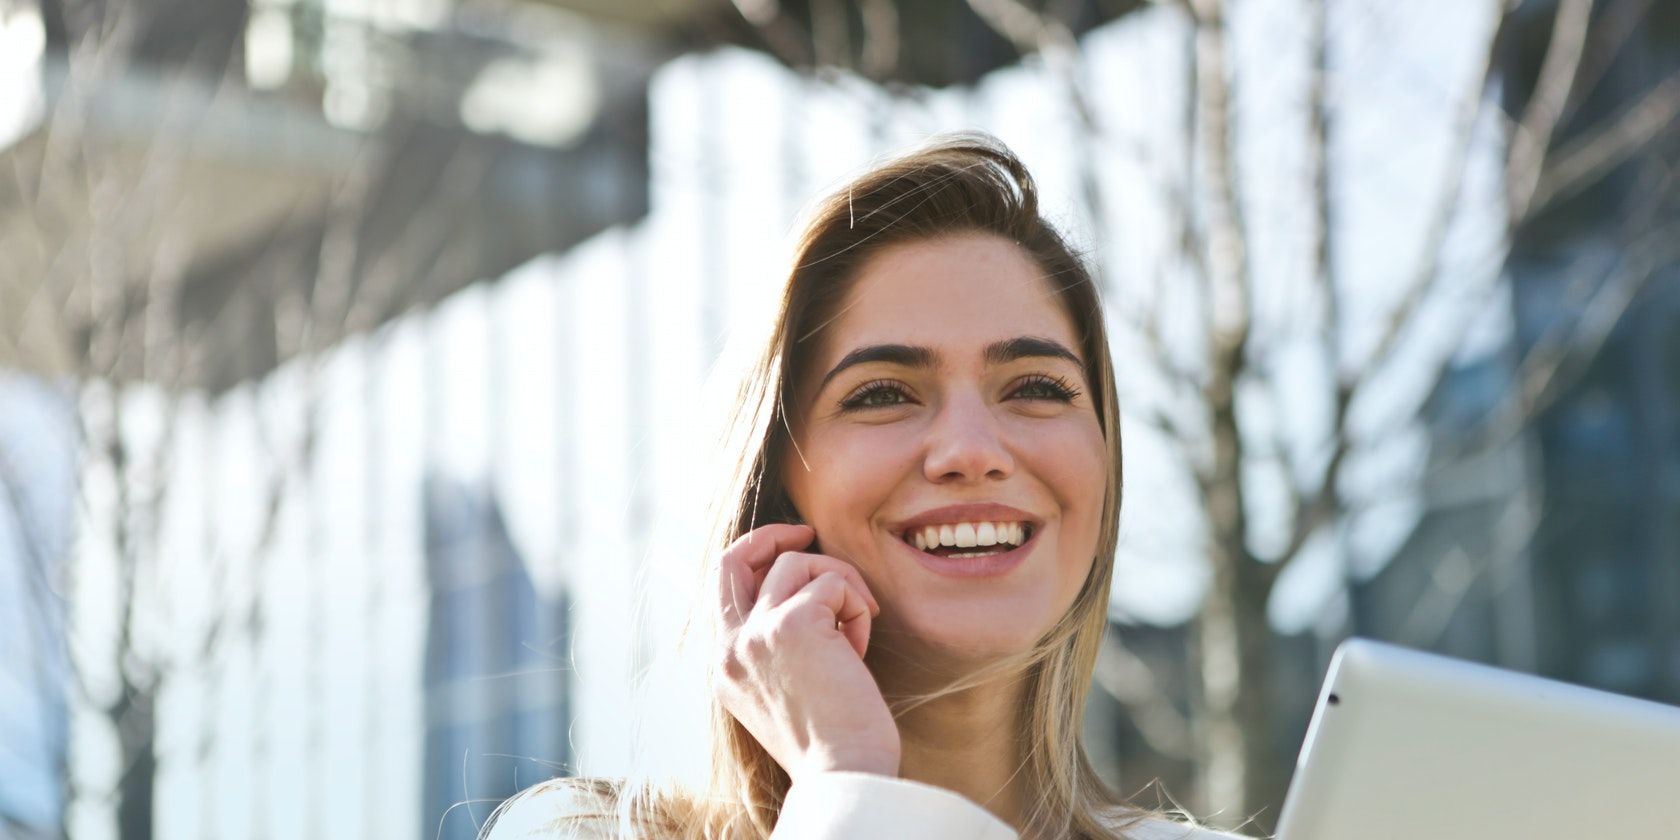 Woman smiling while talking on the phone